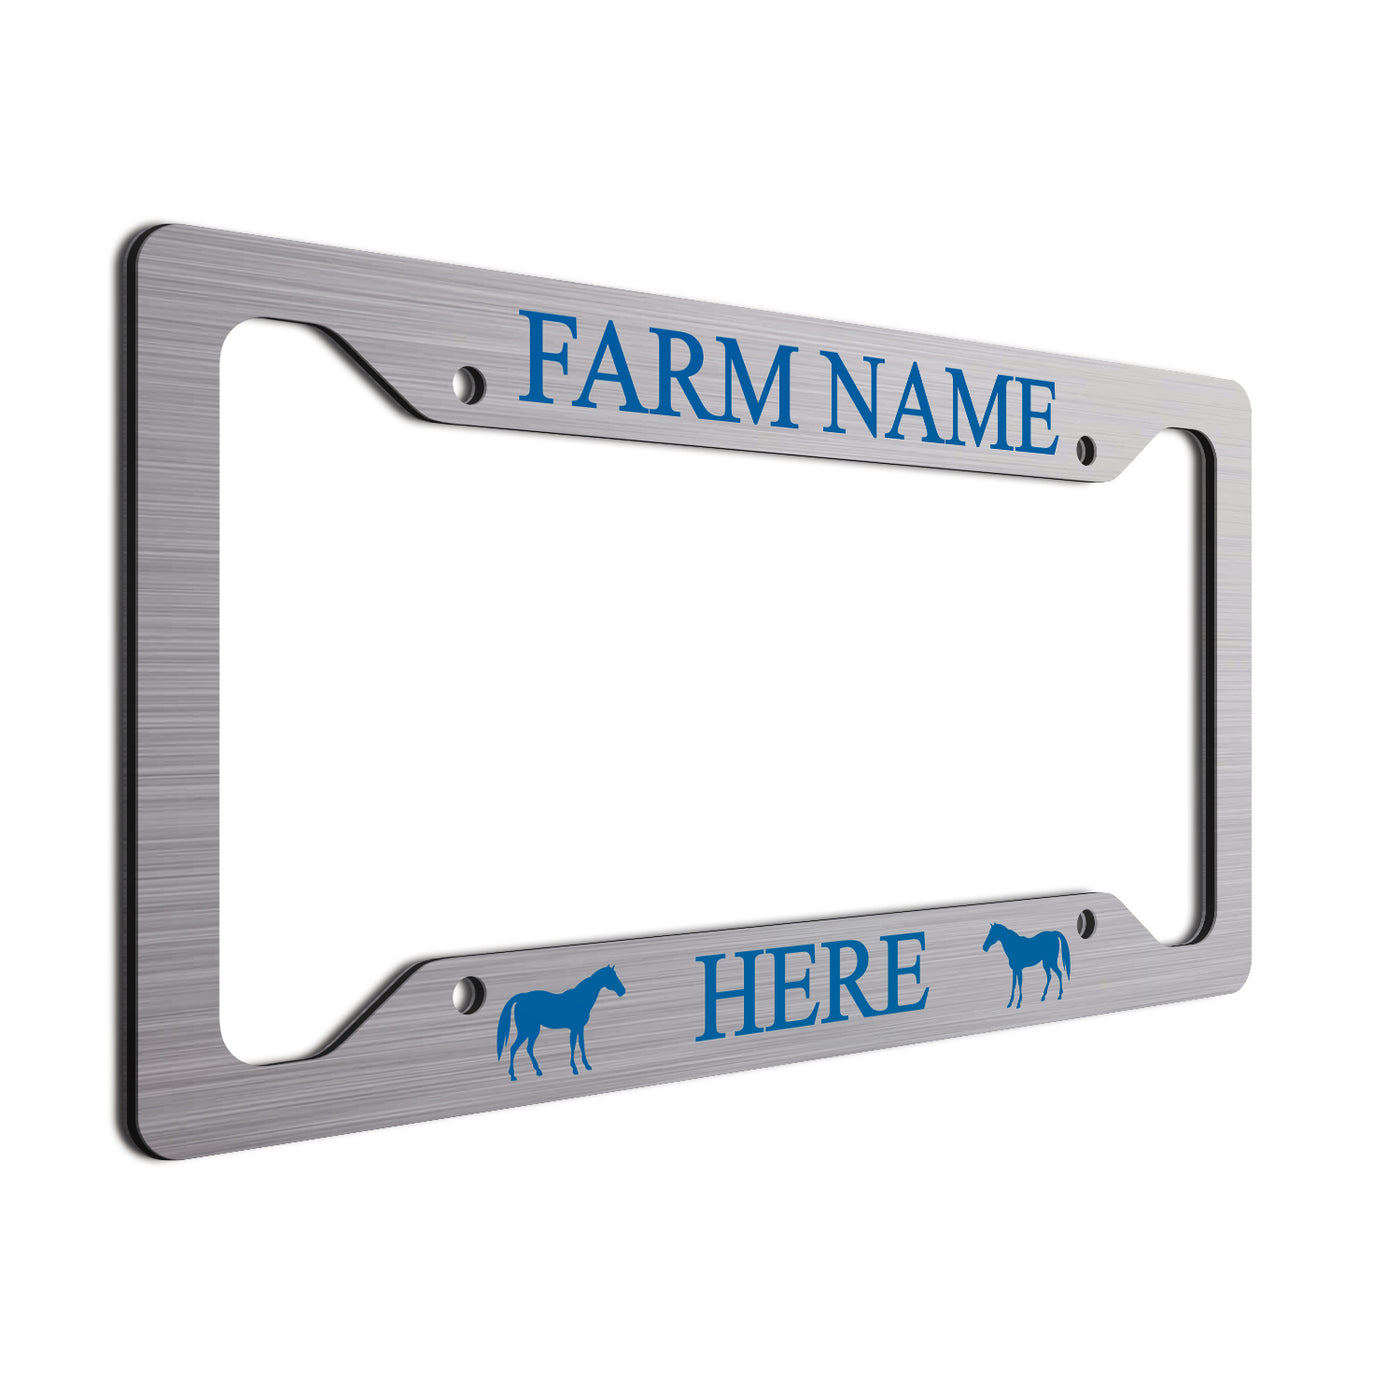 Personalized License Plate Frame for farmers. Choice of colors. Beautiful Brushed Aluminum. Your farm or ranch name will shine!